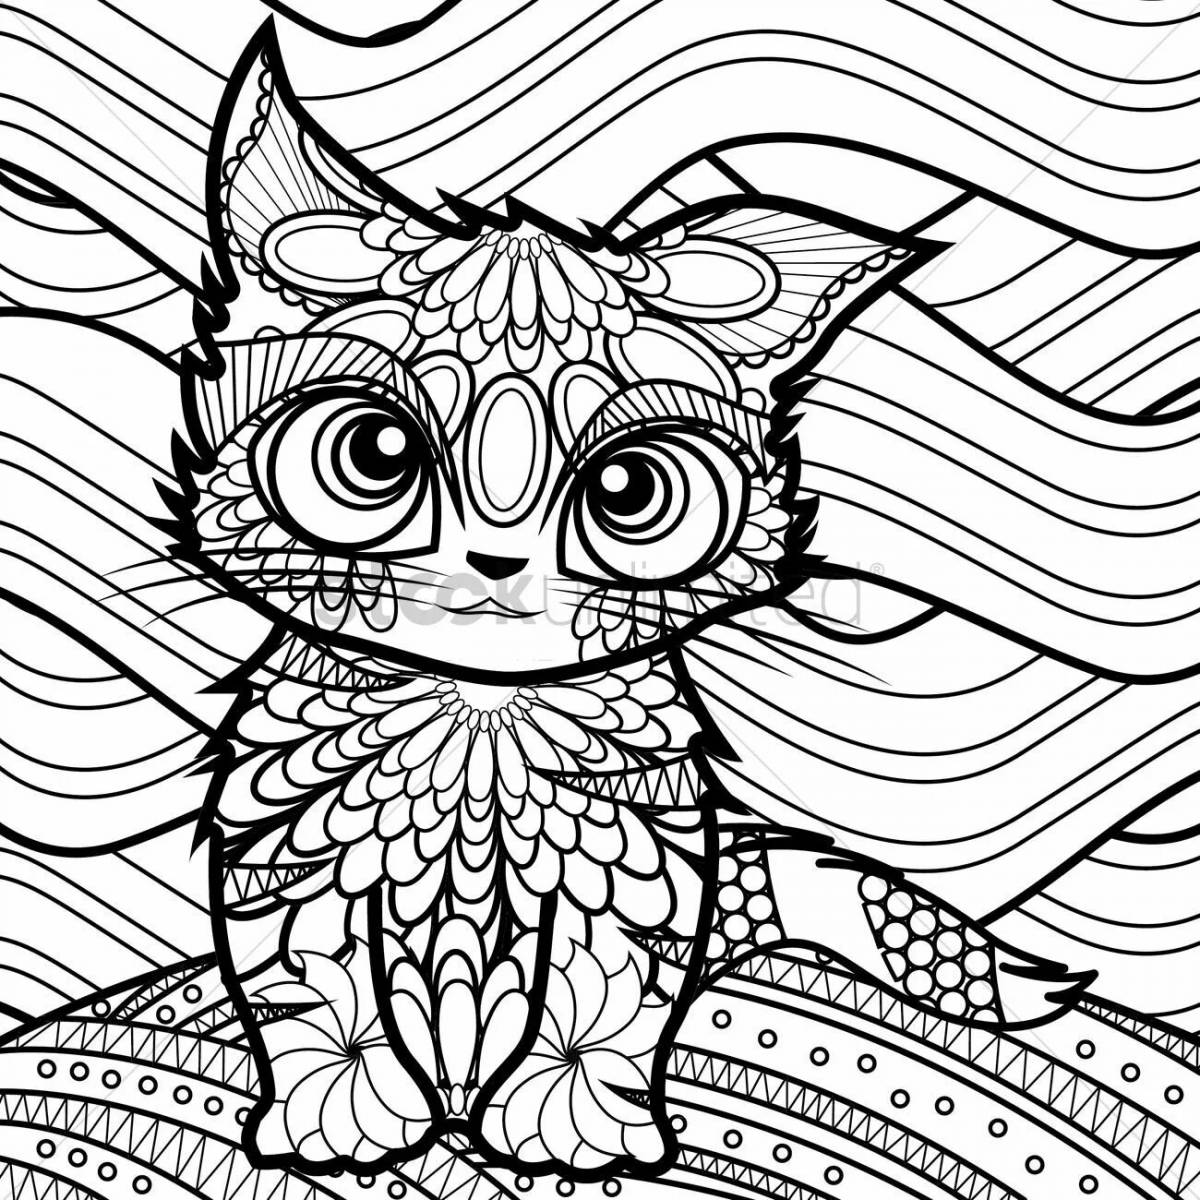 Fairy cat coloring page art